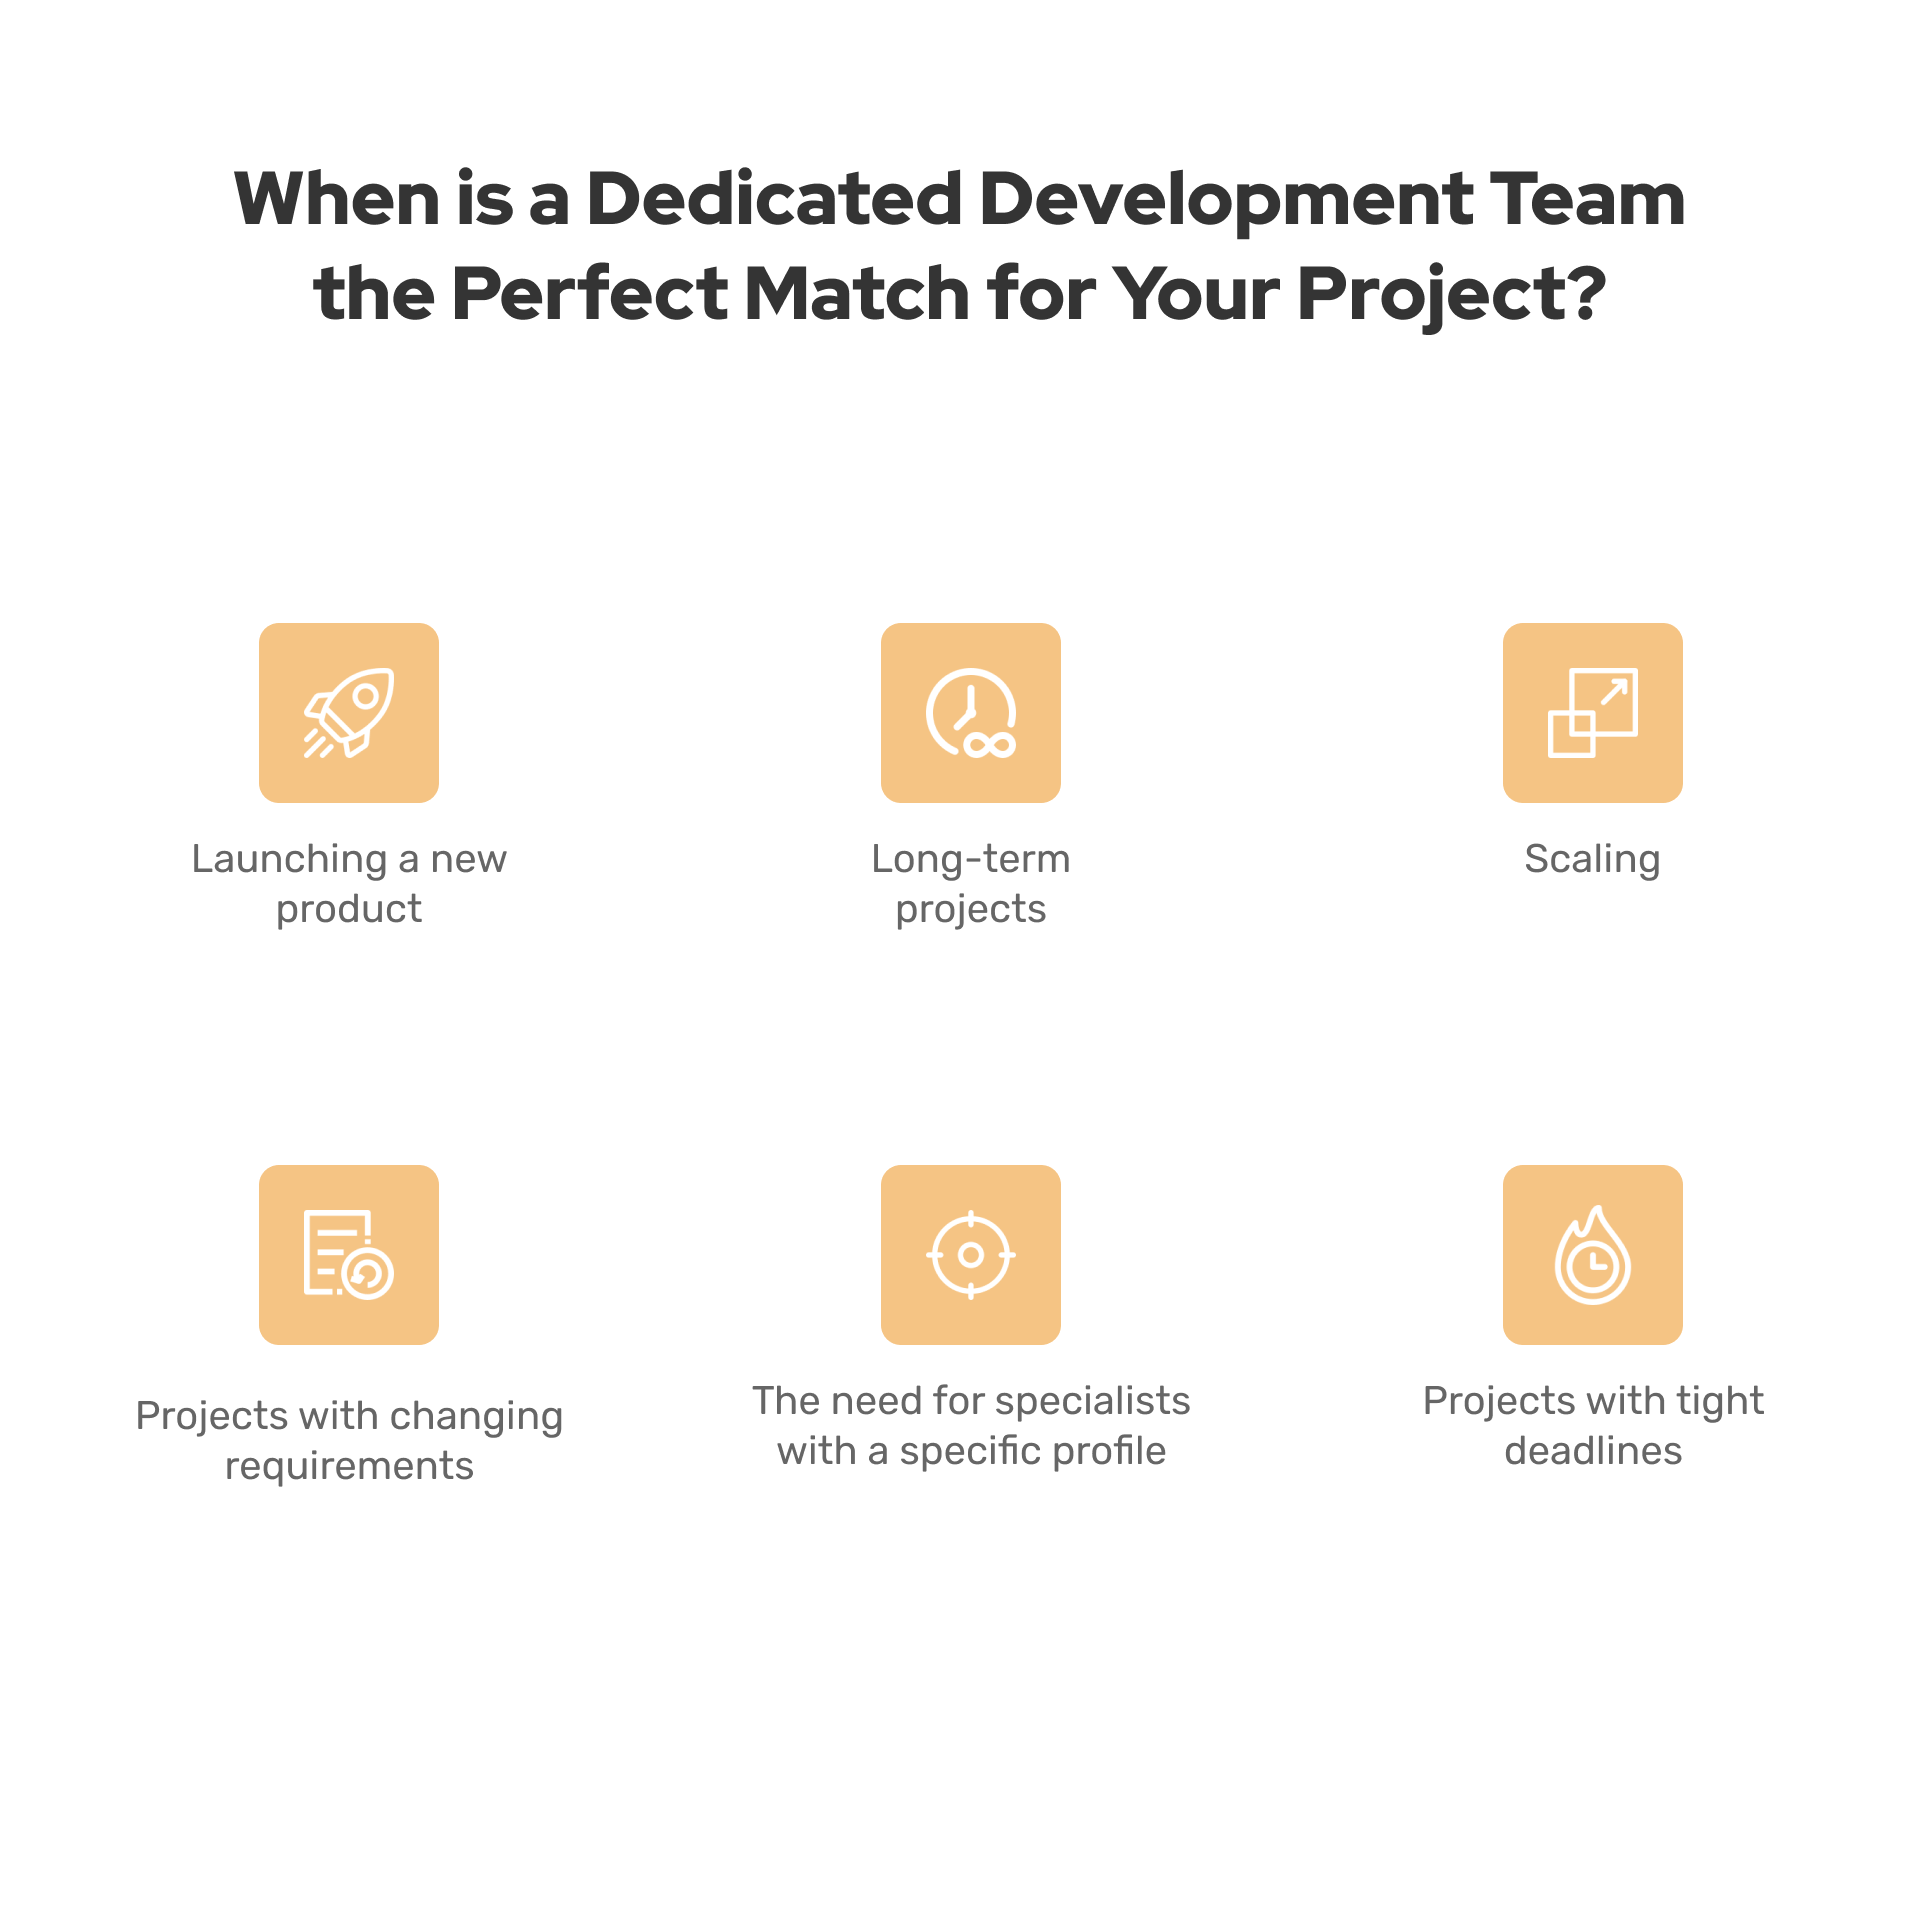 In most cases, a dedicated team model can be the perfect match for your project. It involves building a team of experts who are solely focused on your project's success, with a deep understanding of your business needs and objectives.